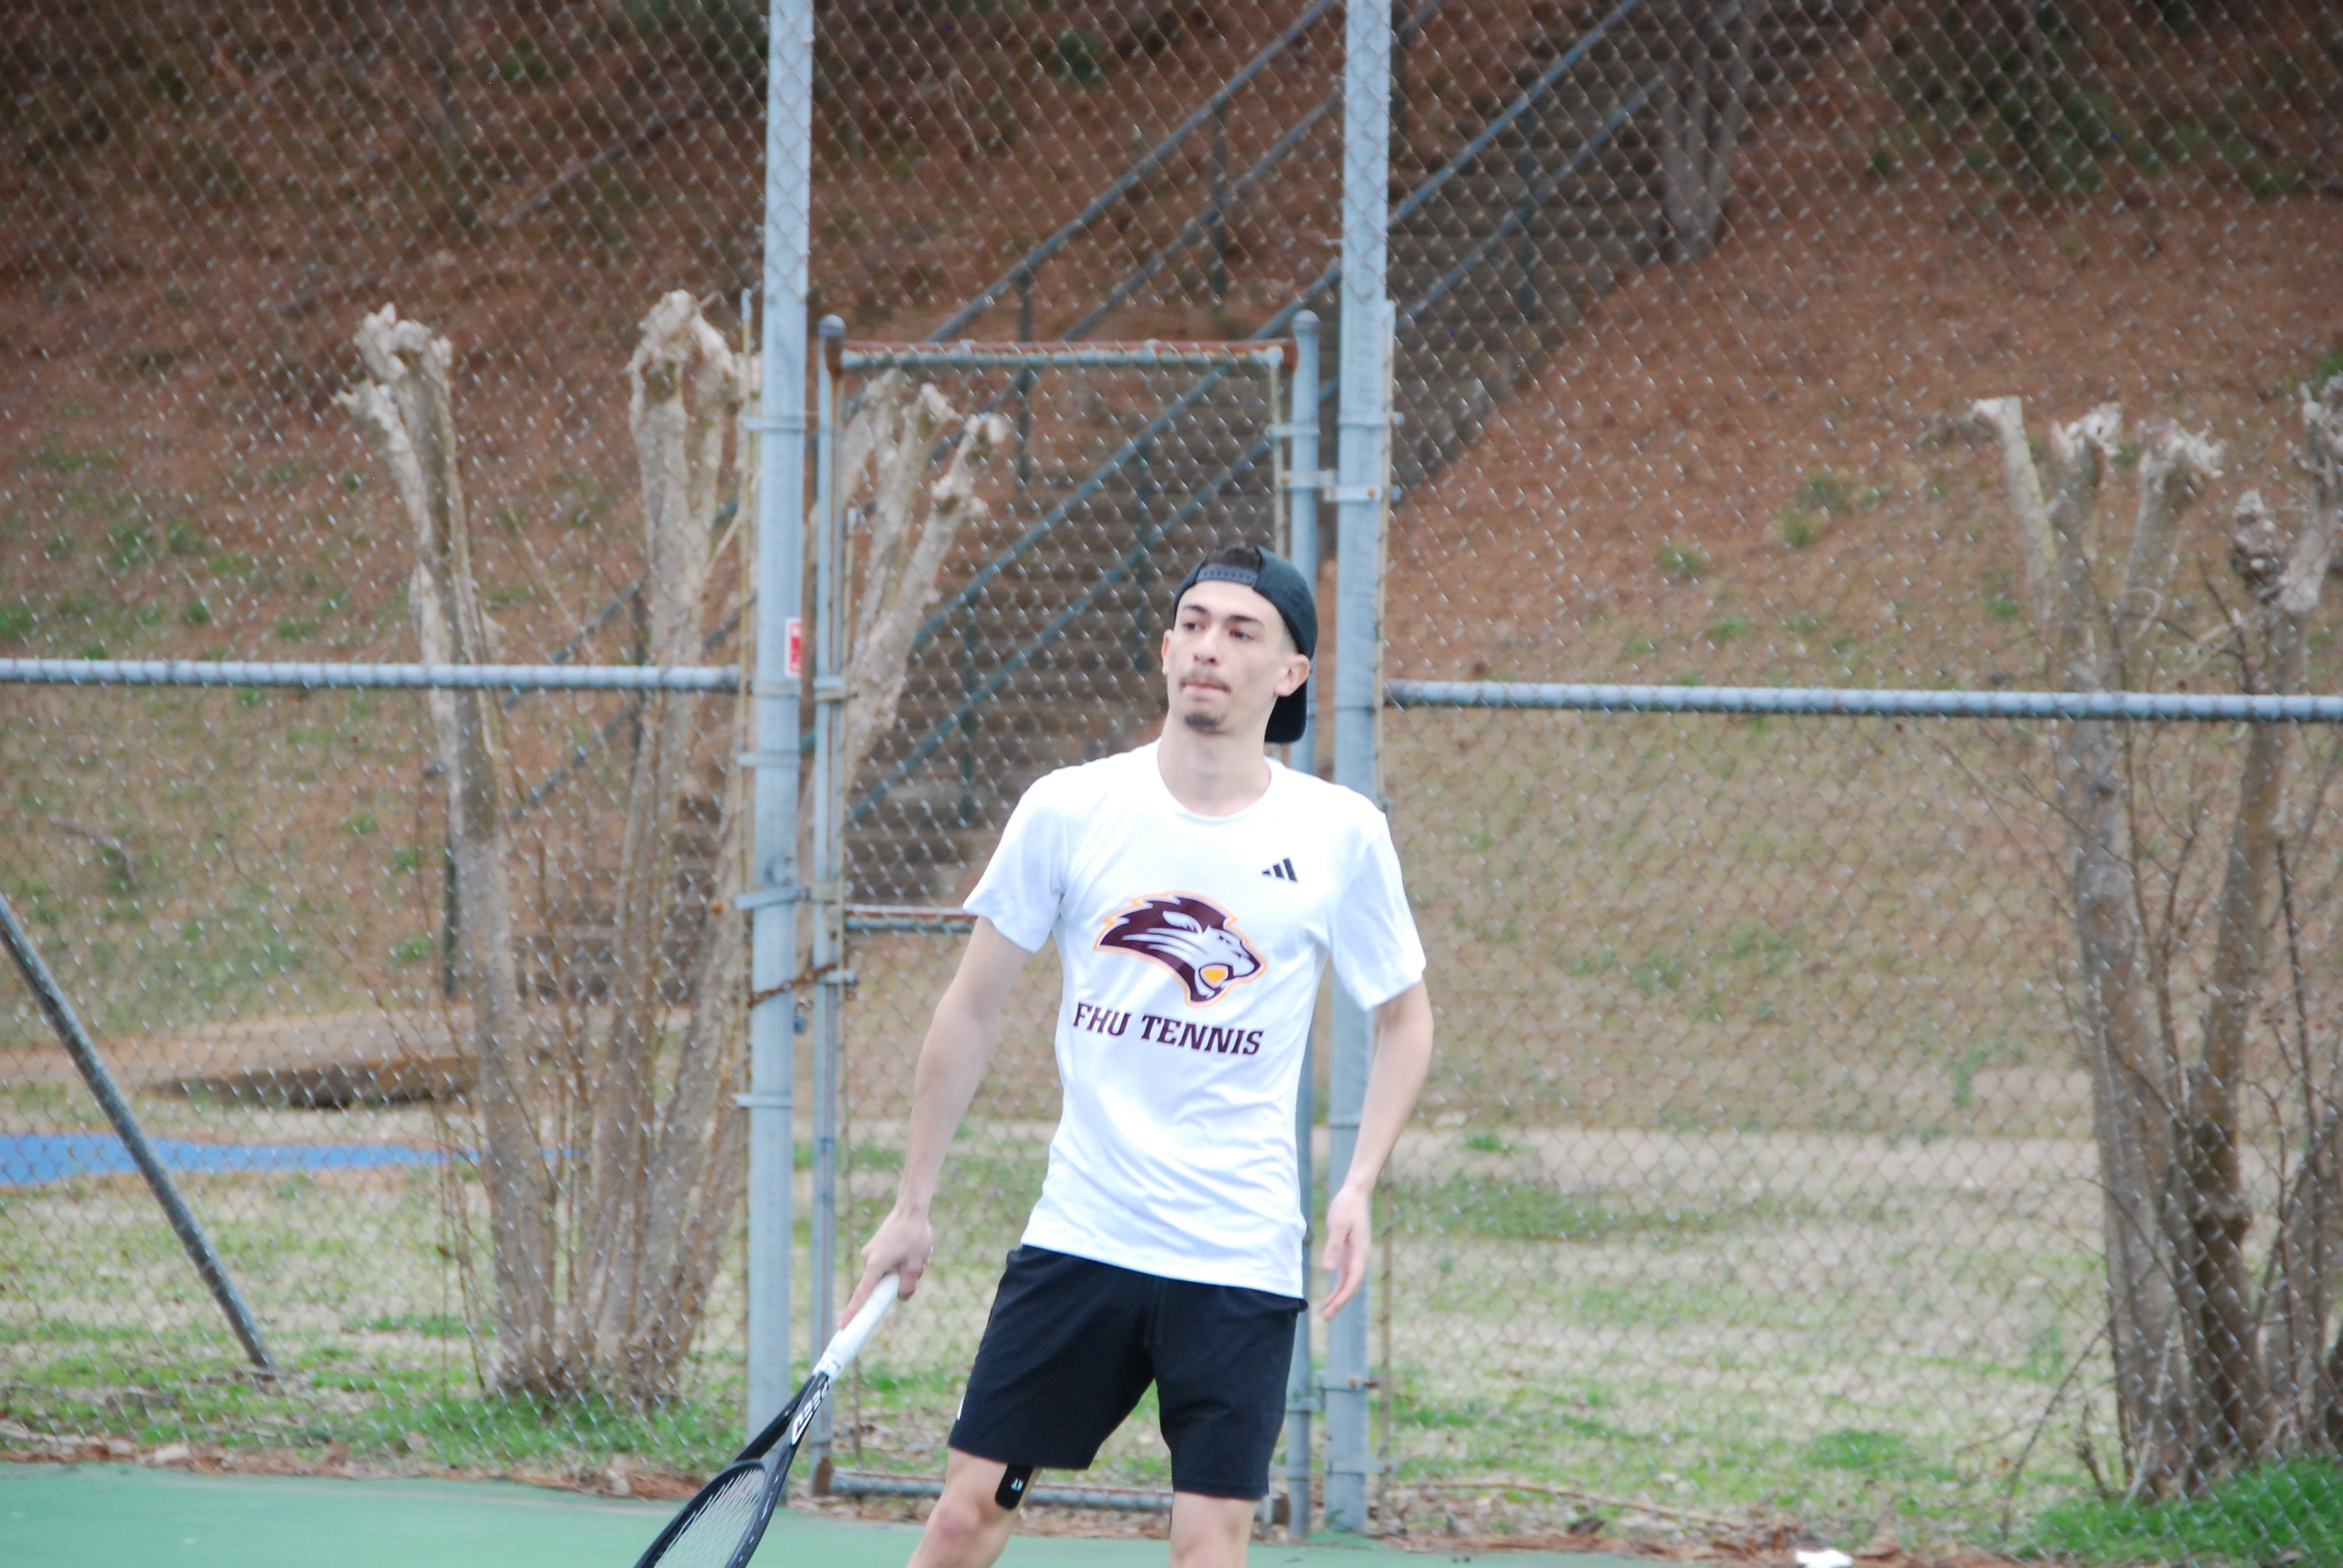 Doubles point proves downfall for FHU tennis